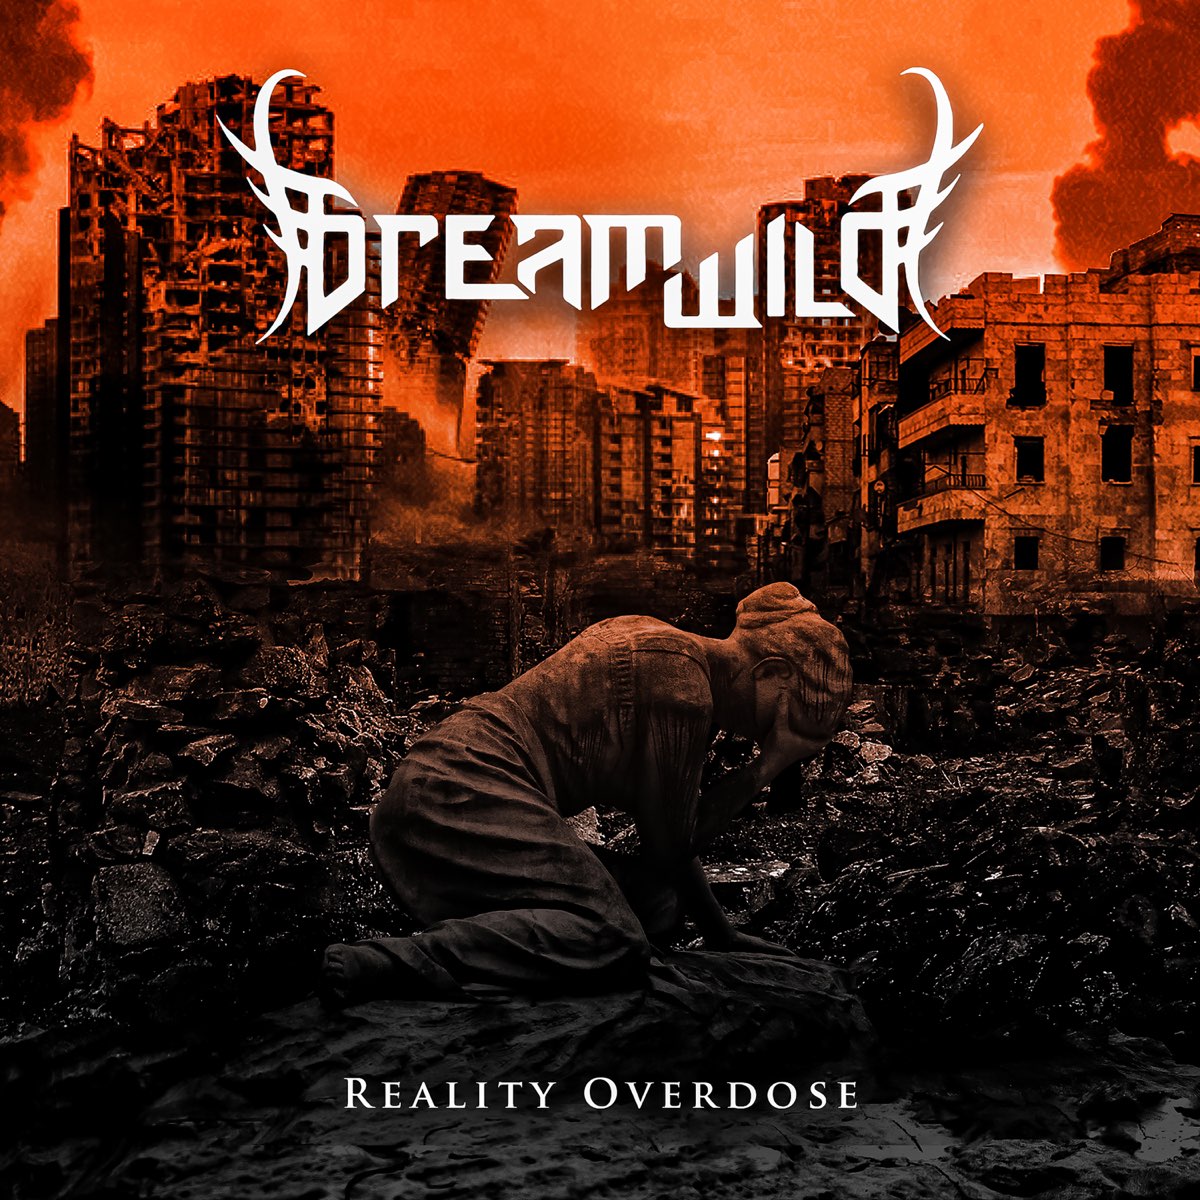 Reality Overdose - Single by Dream Wild on Apple Music